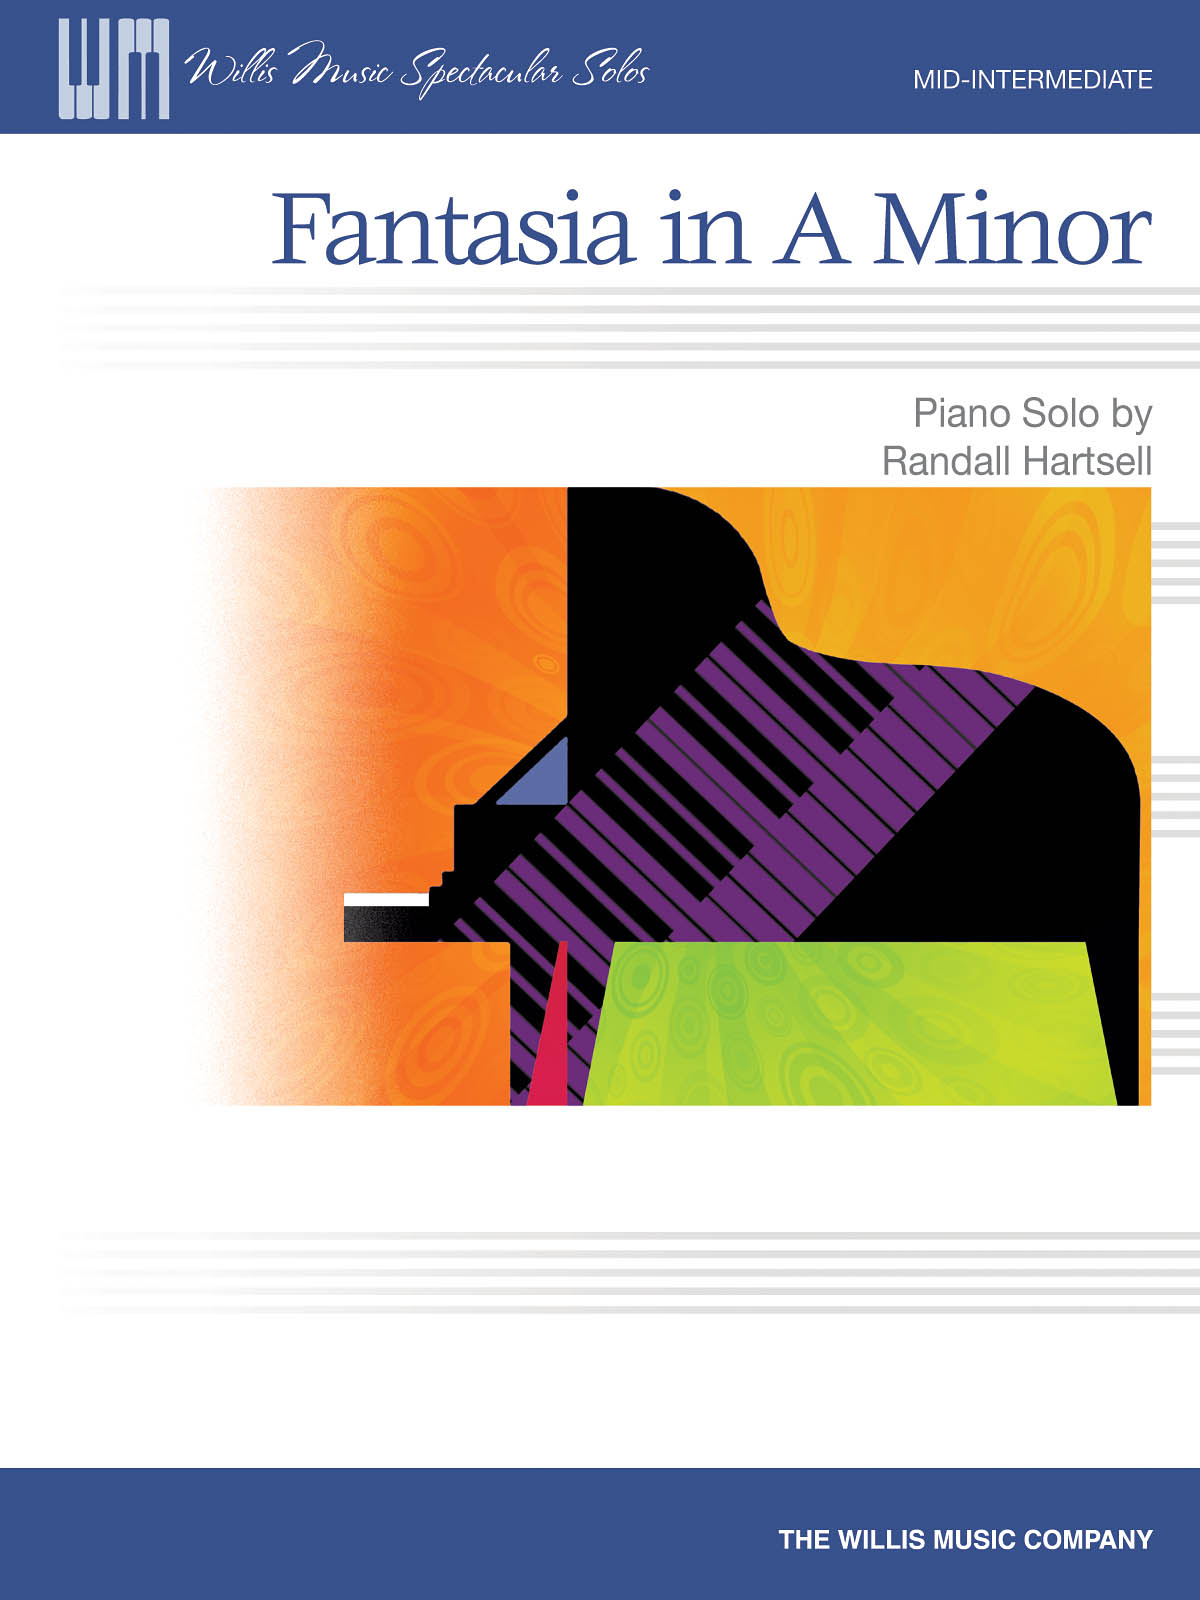 Fantasia in A Minor - National Federation of Music Clubs 2014-2016 Selection Mid-Intermediate Level